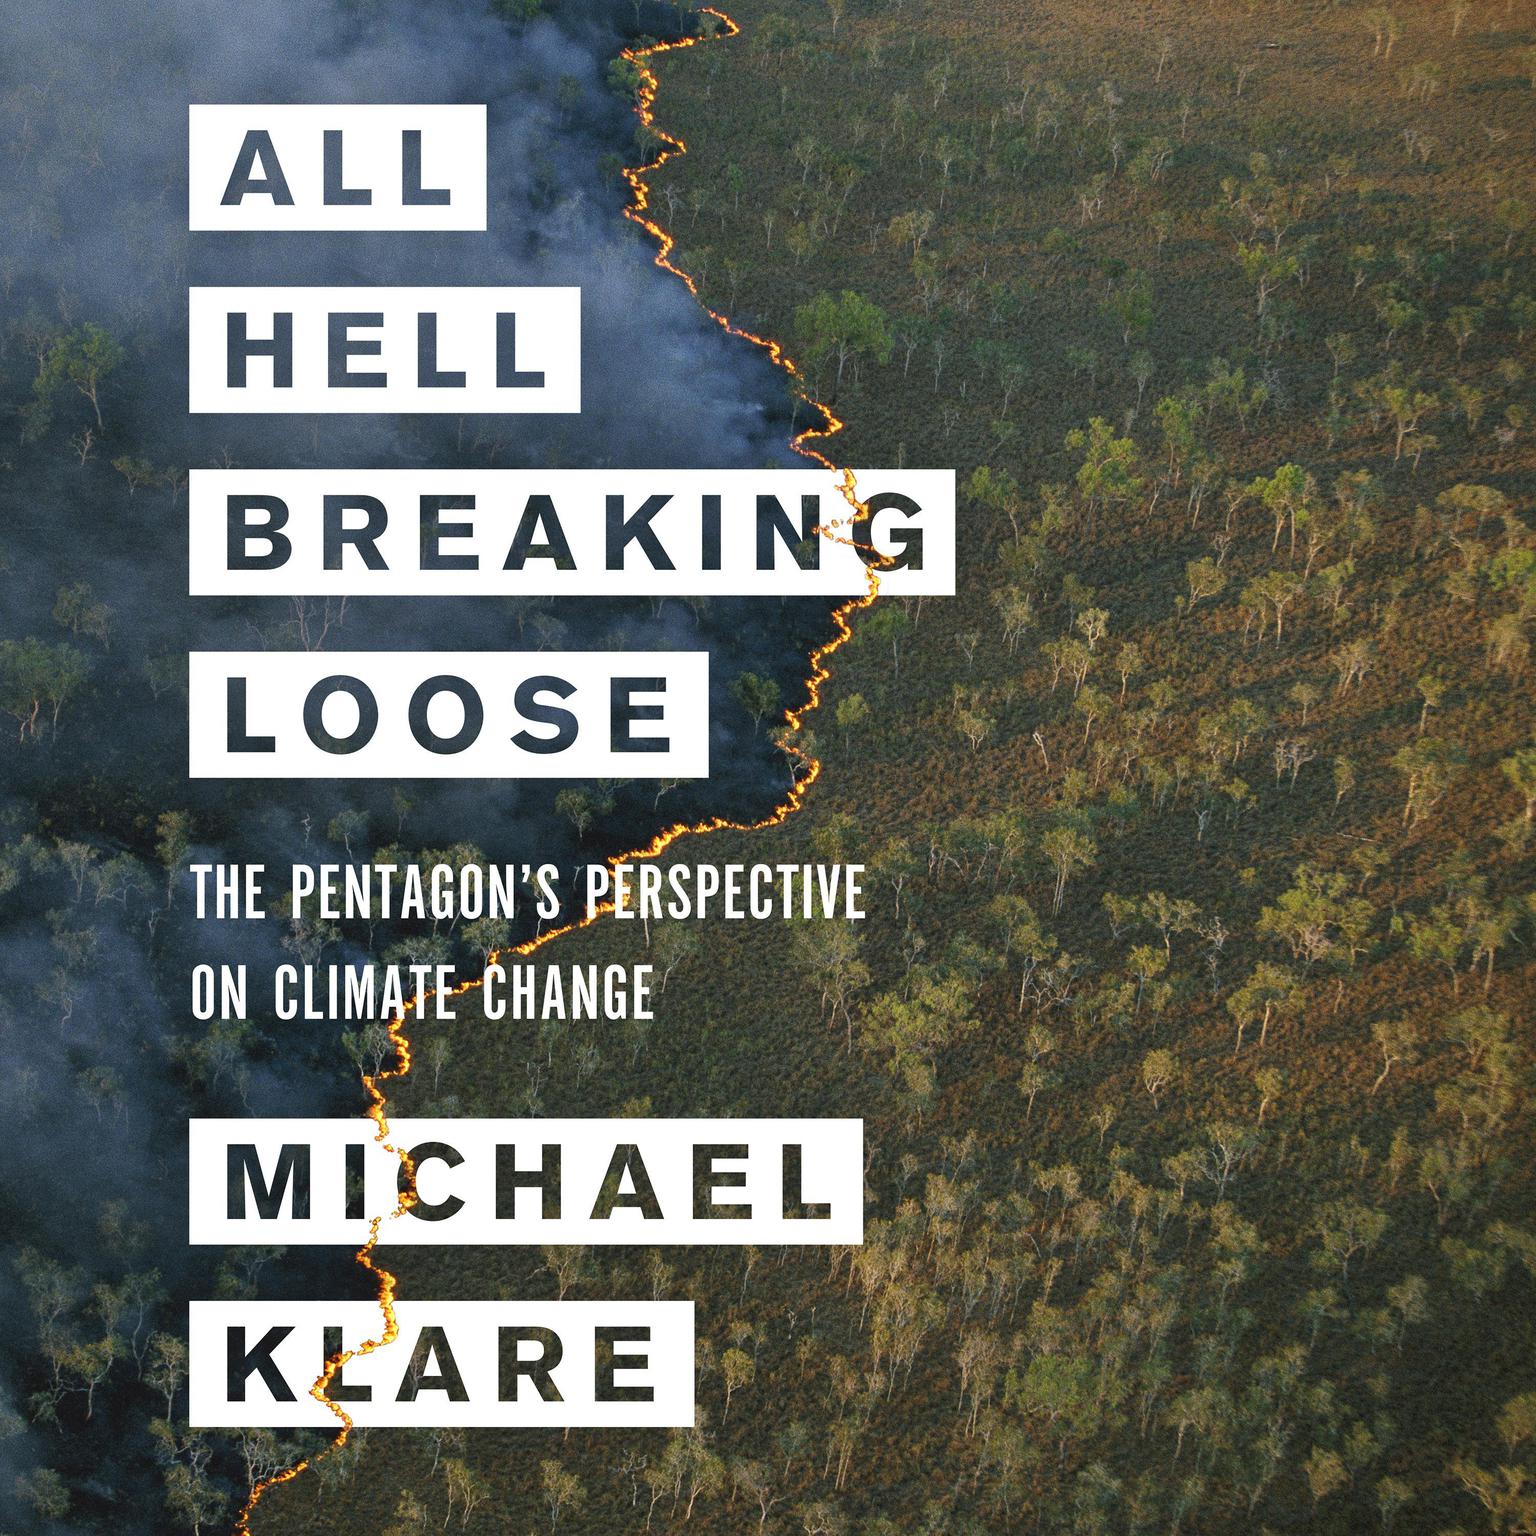 All Hell Breaking Loose: The Pentagons Perspective on Climate Change Audiobook, by Michael Klare